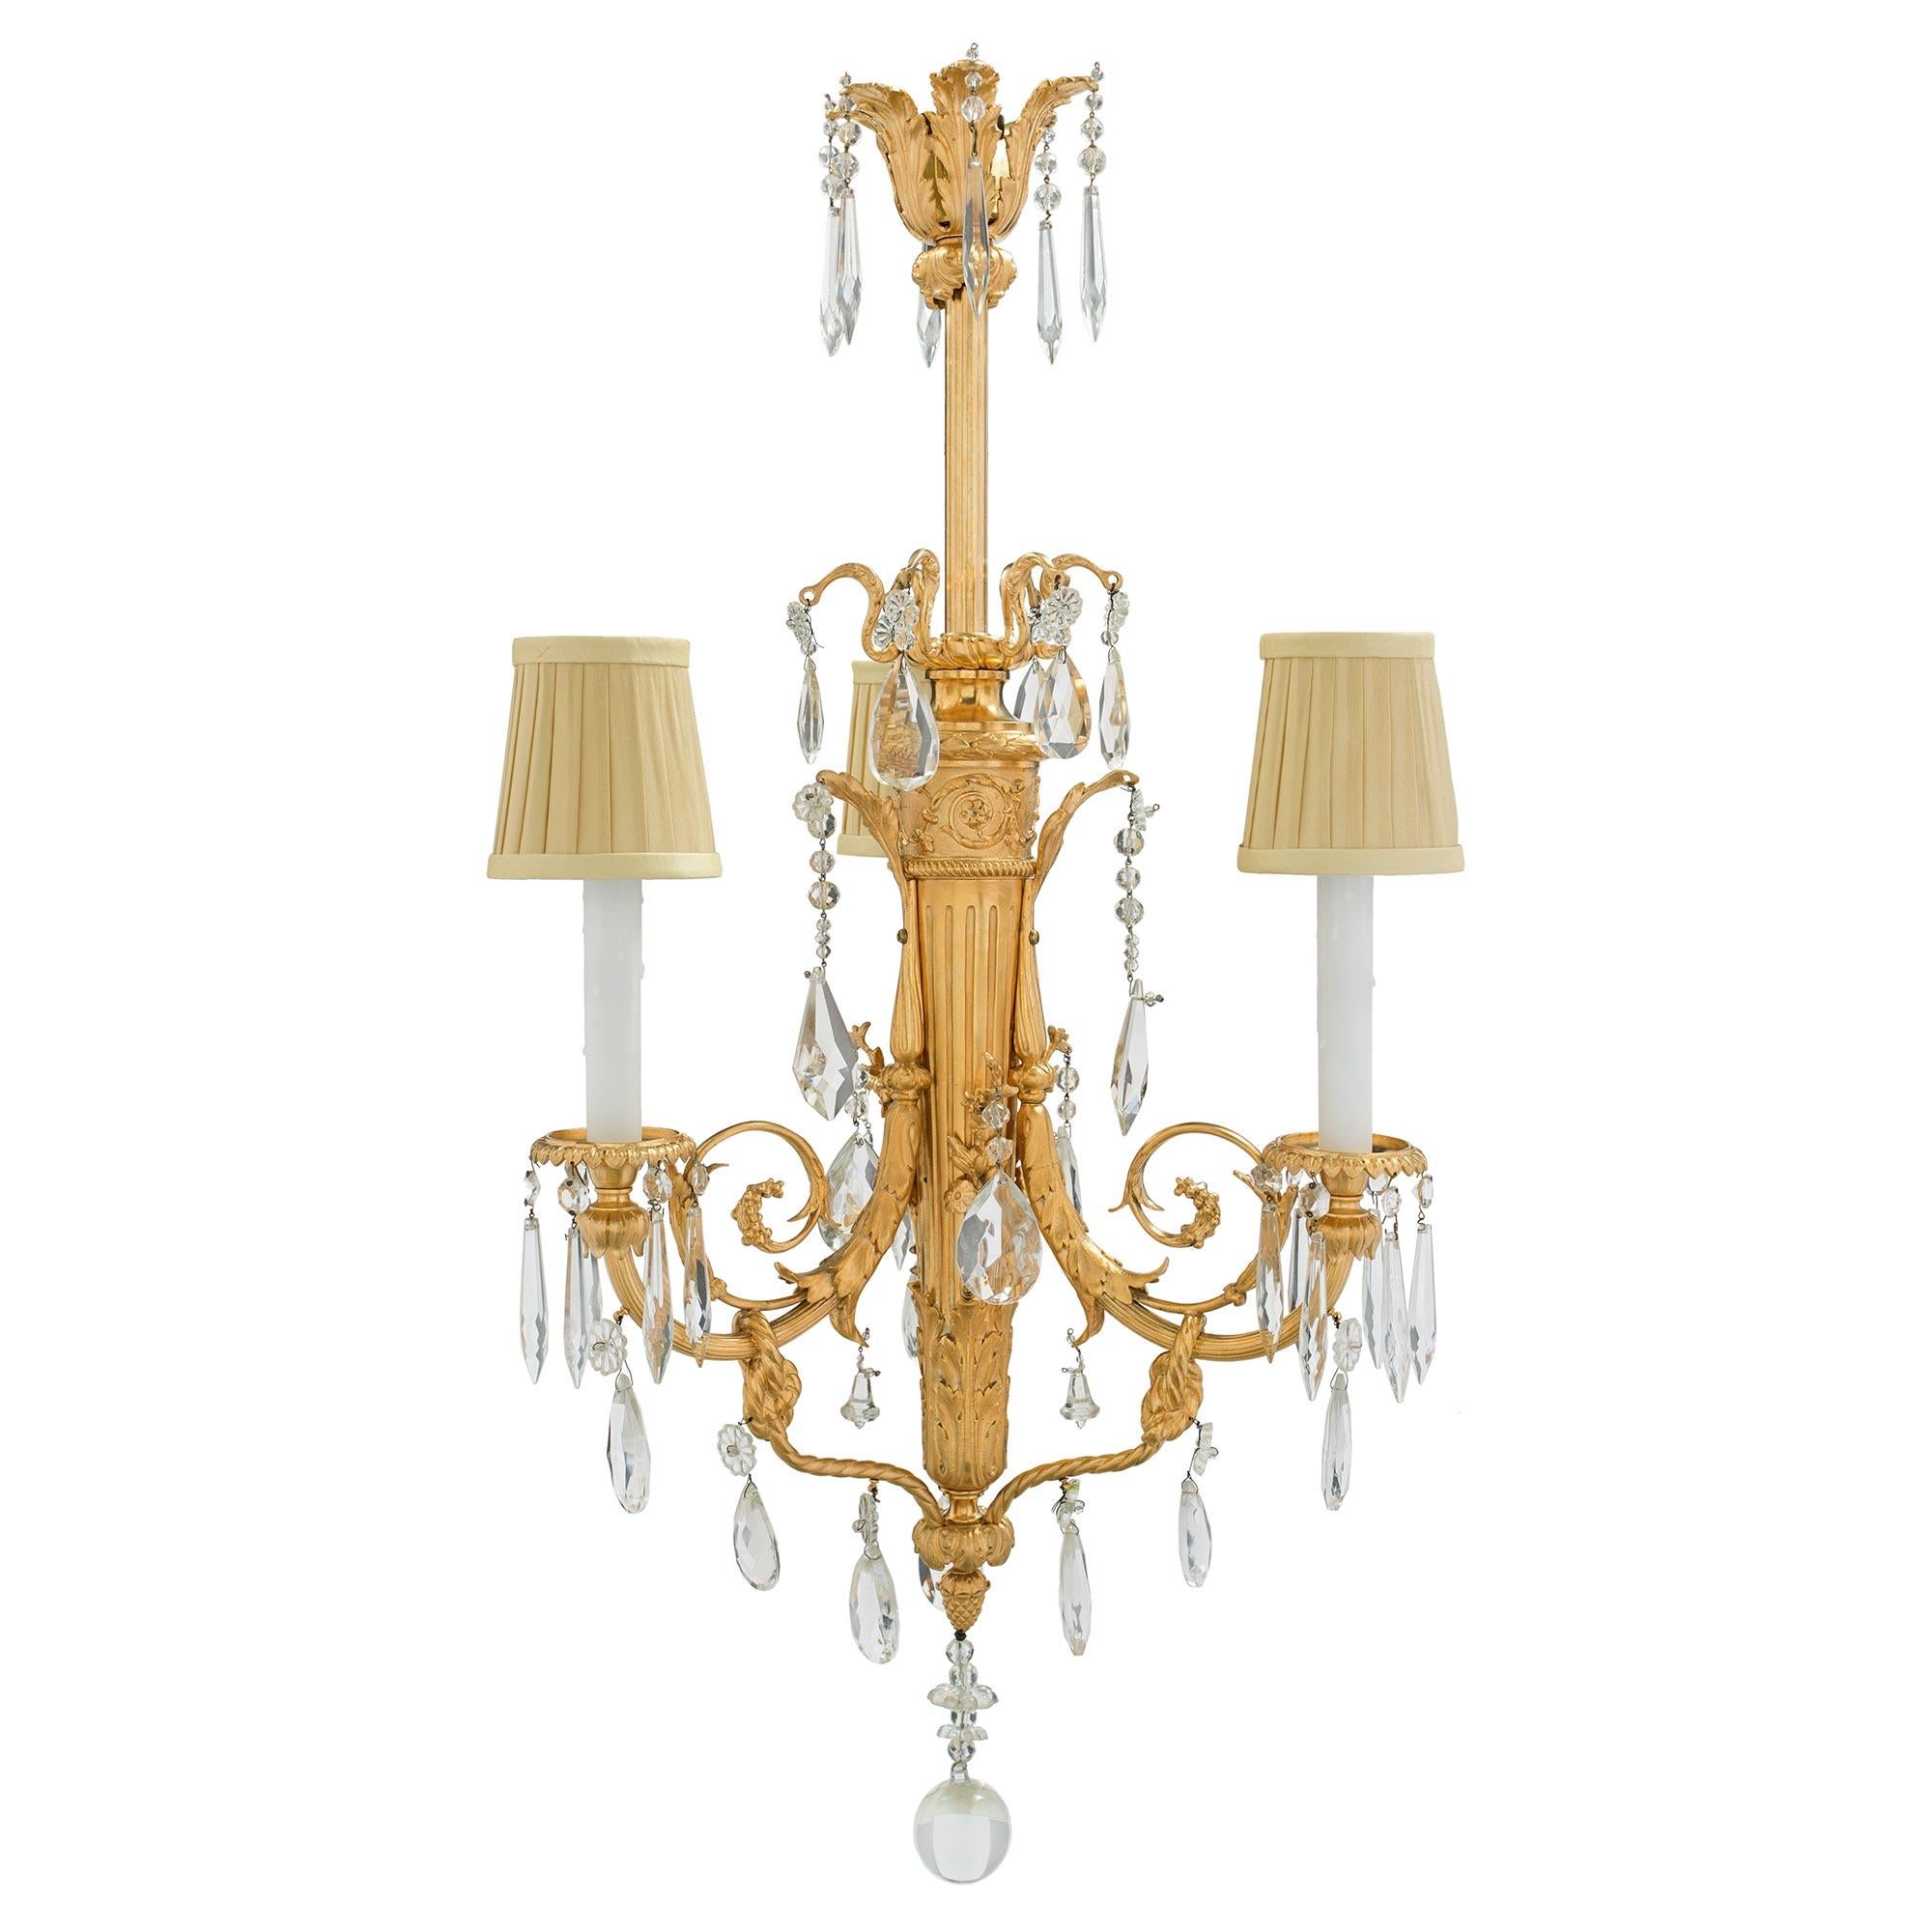 A lovely and very elegant French 19th century Louis XVI st. Baccarat crystal and ormolu three light chandelier. Centered at the bottom is an inverted ormolu acorn finial supporting a large crystal sphere with rosettes and smaller spheres. Joining to